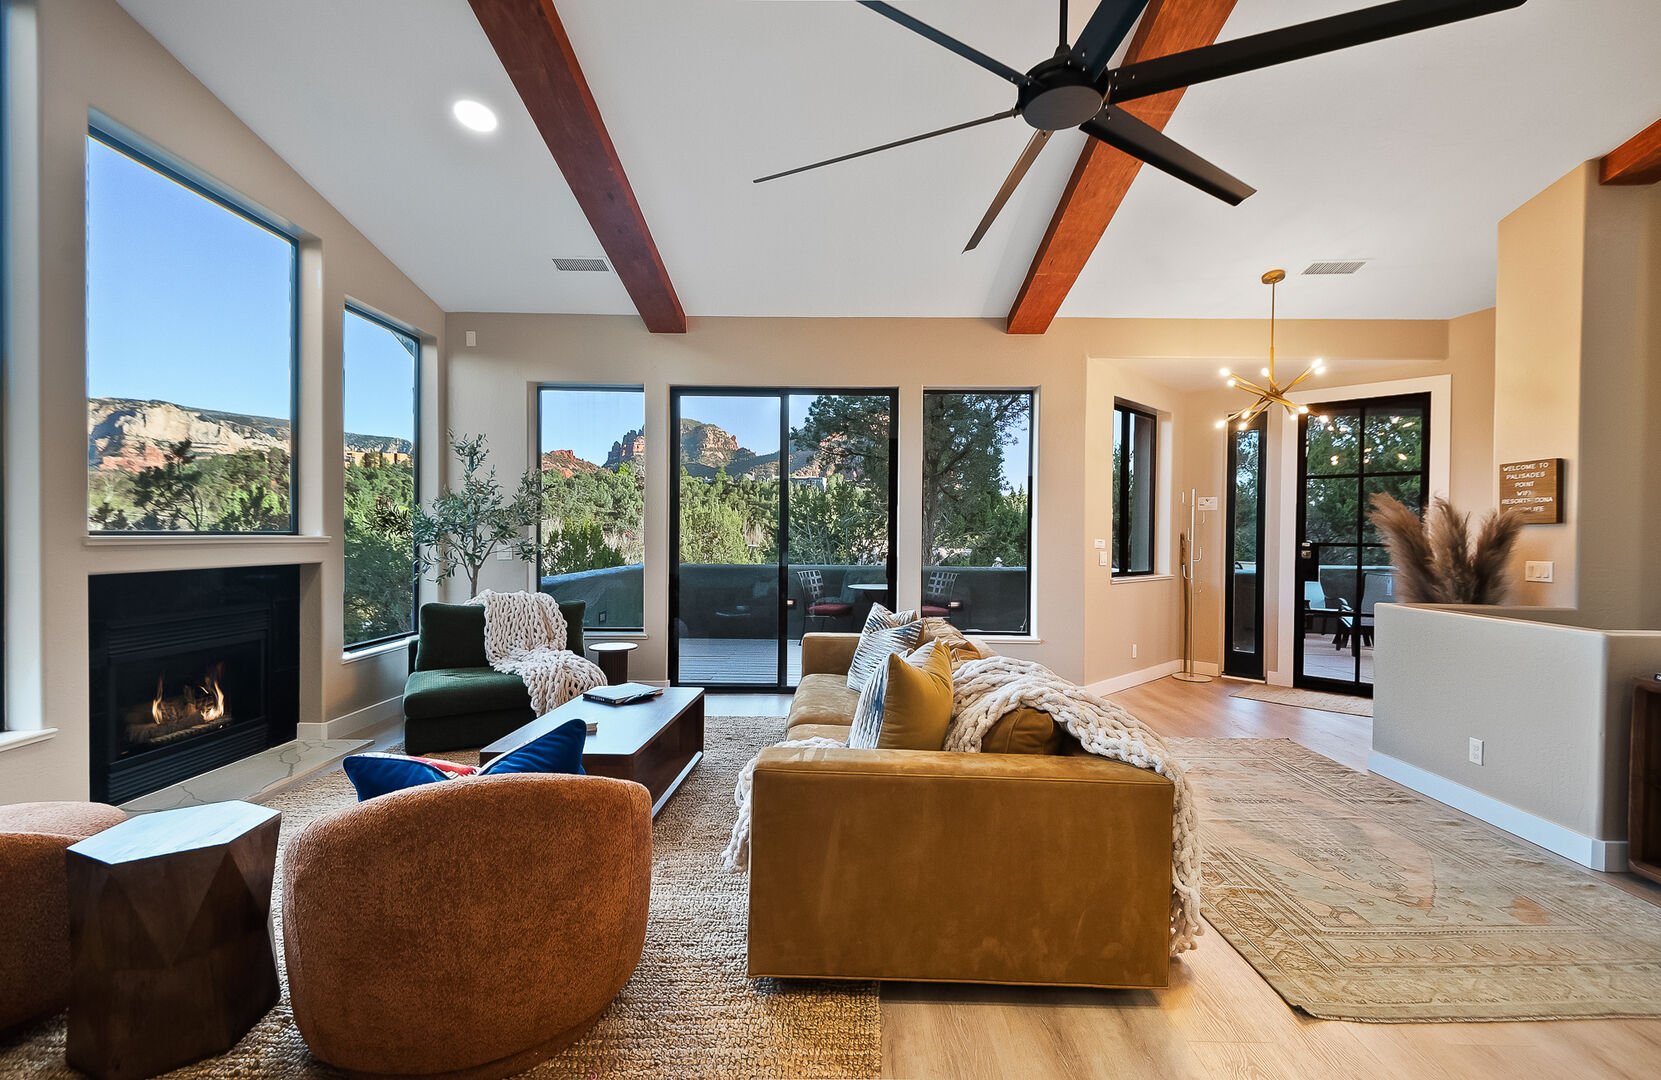 High Wood Beam Ceilings and Tons of Windows to Bring in the Natural Lighting!